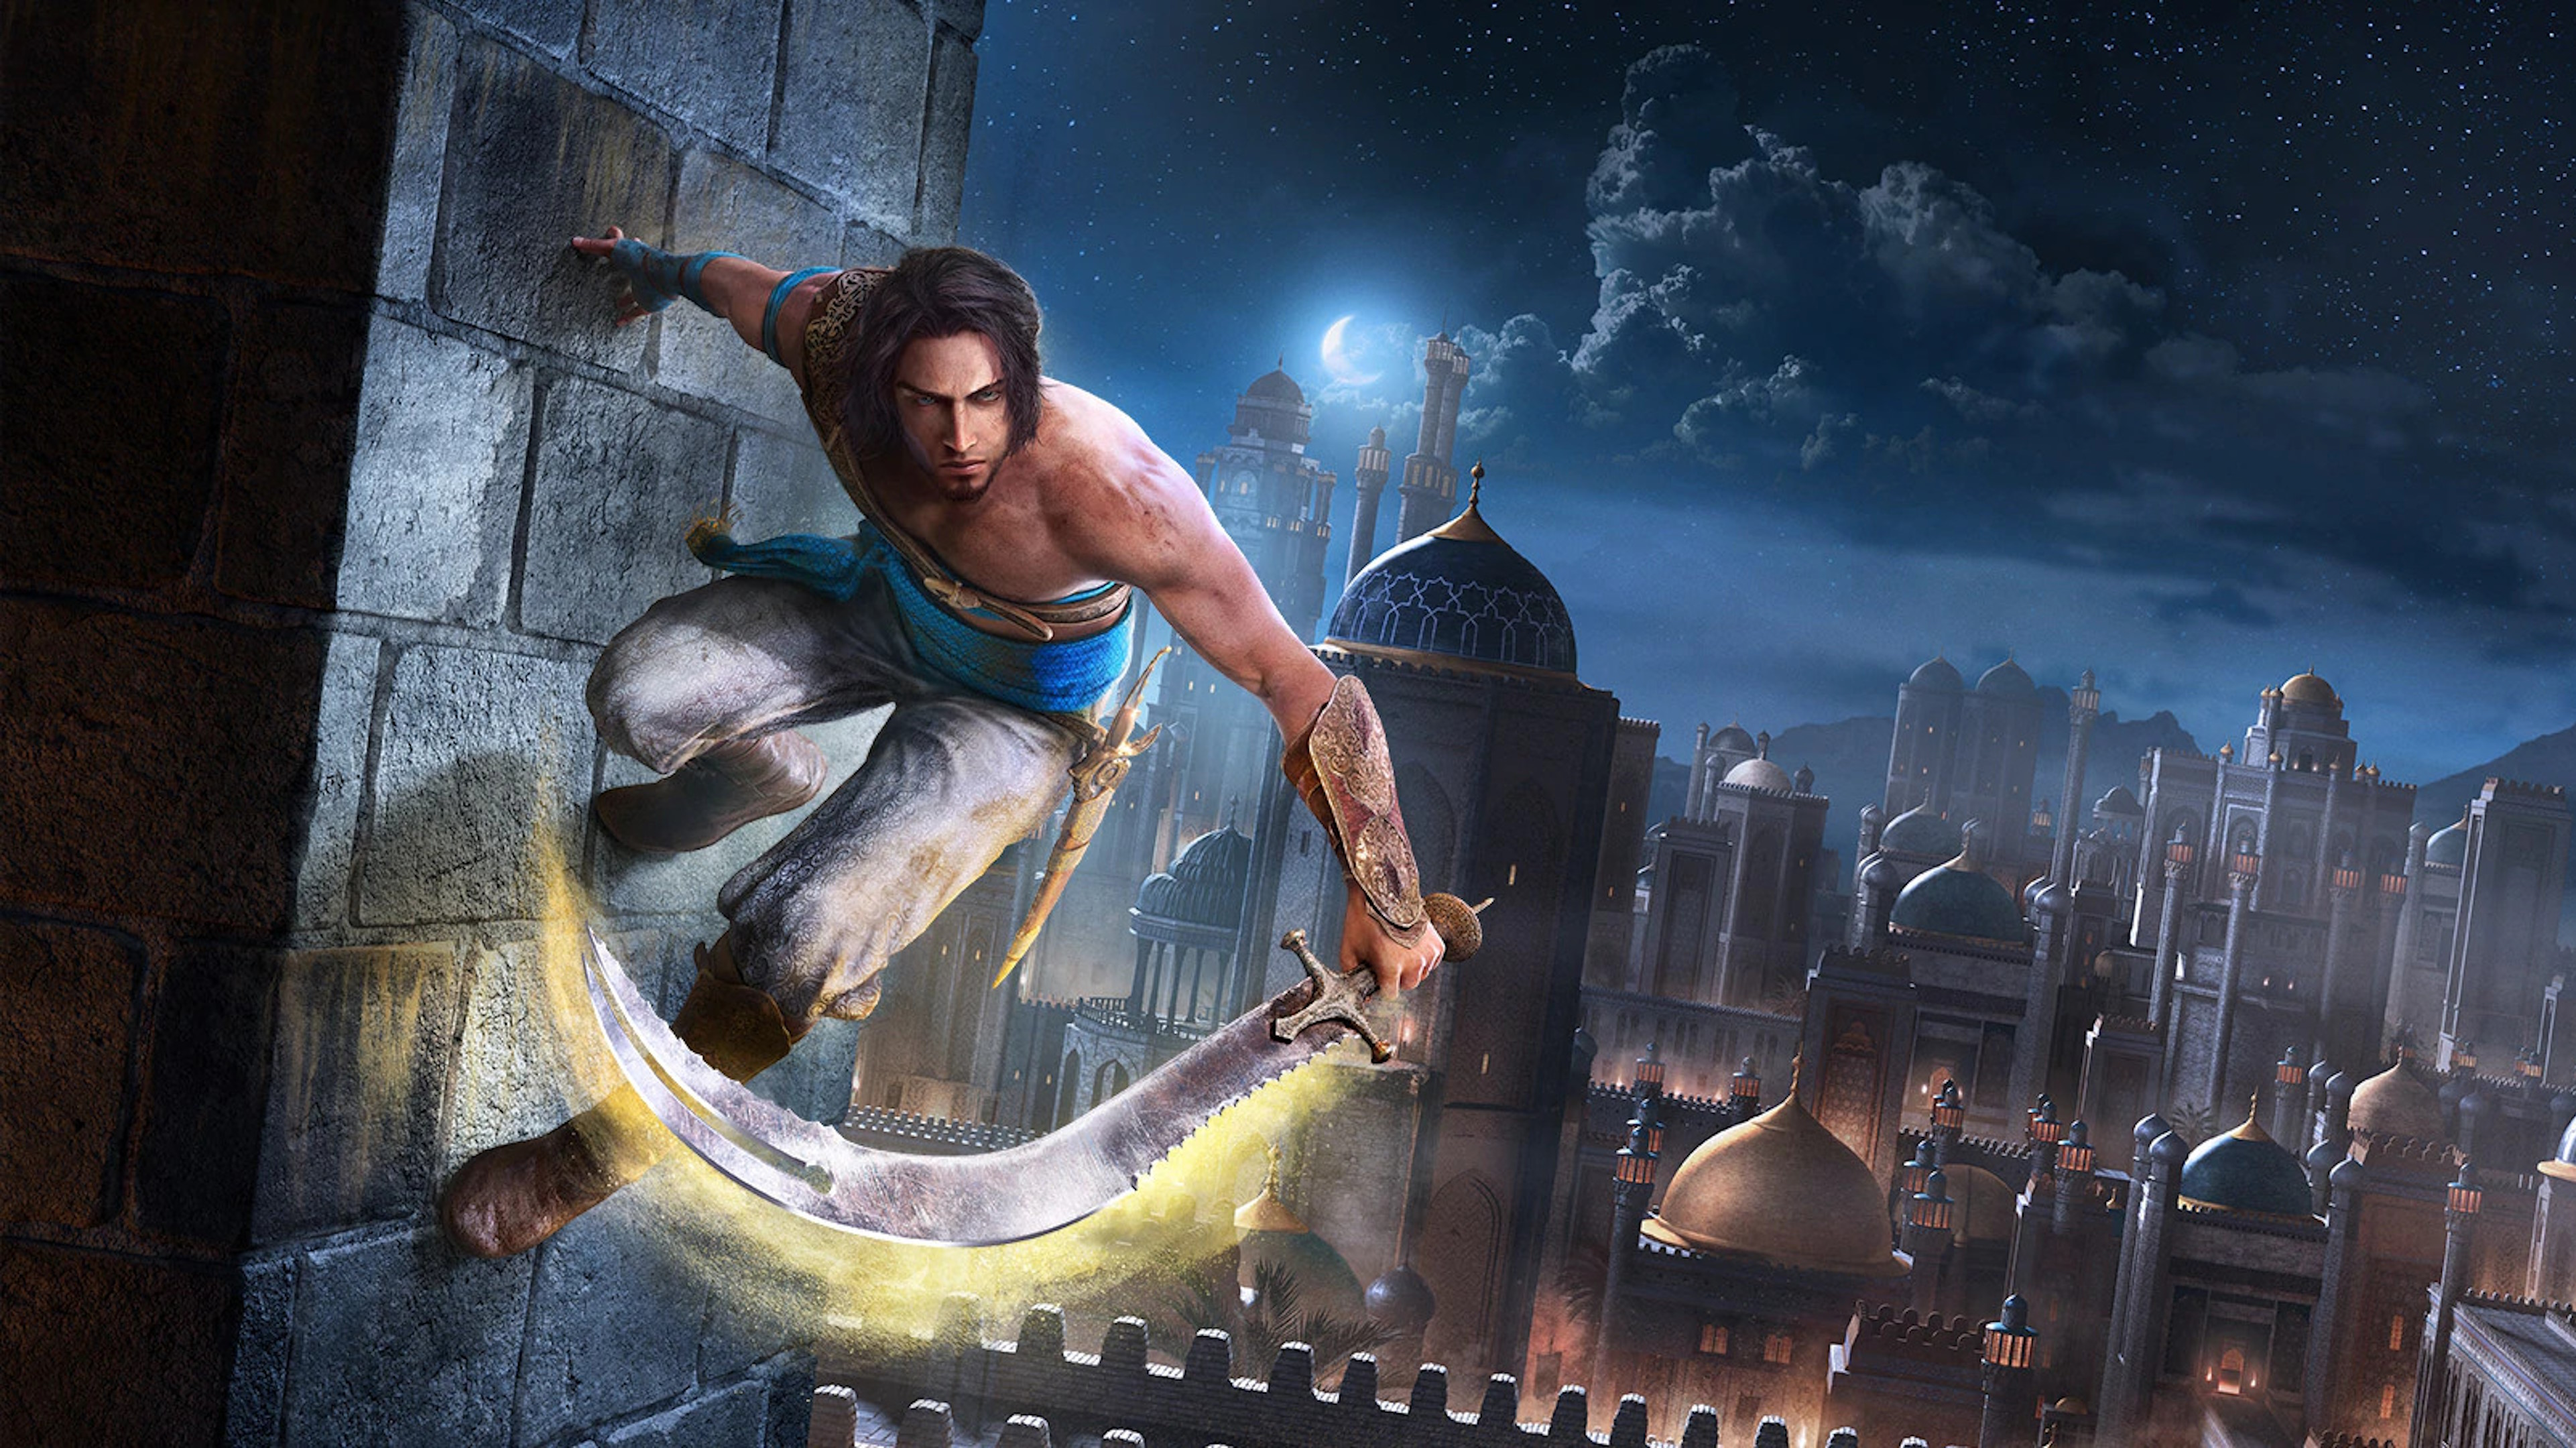  Six months after rebooting Prince of Persia: The Sands of Time Remake, Ubisoft says it's coming along nicely: 'The project has passed an important internal milestone' 